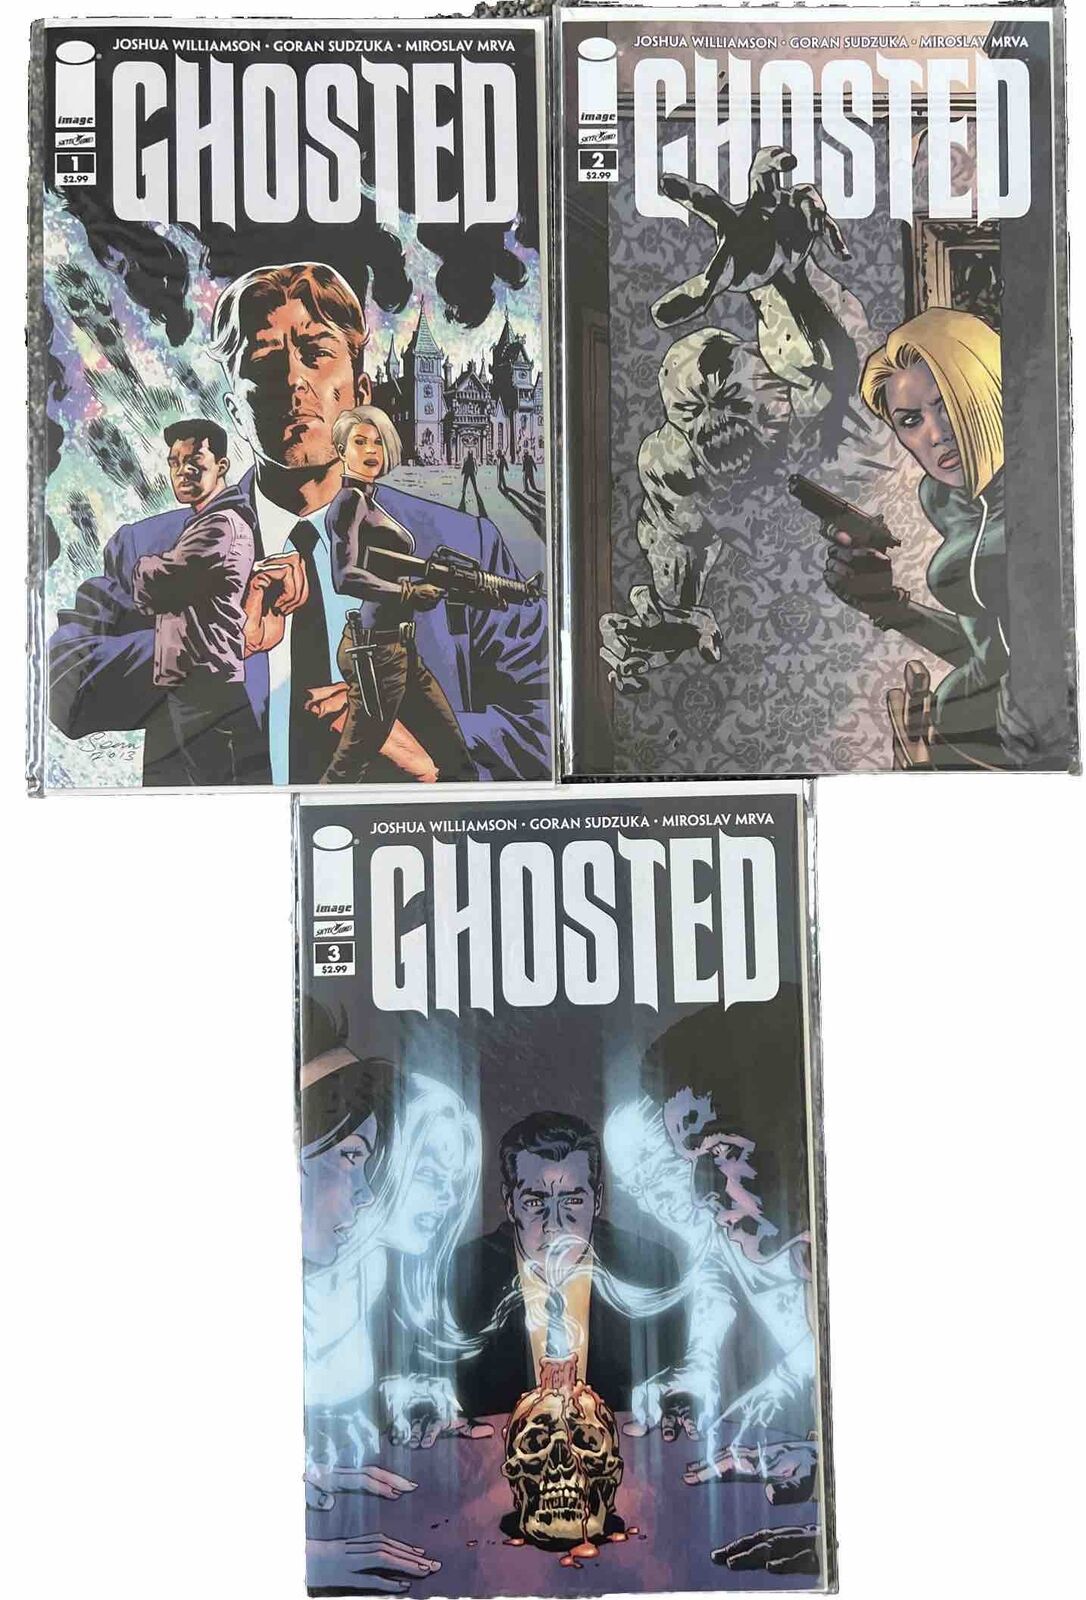 GHOSTED #1 - 3 (2013) | Image Comics